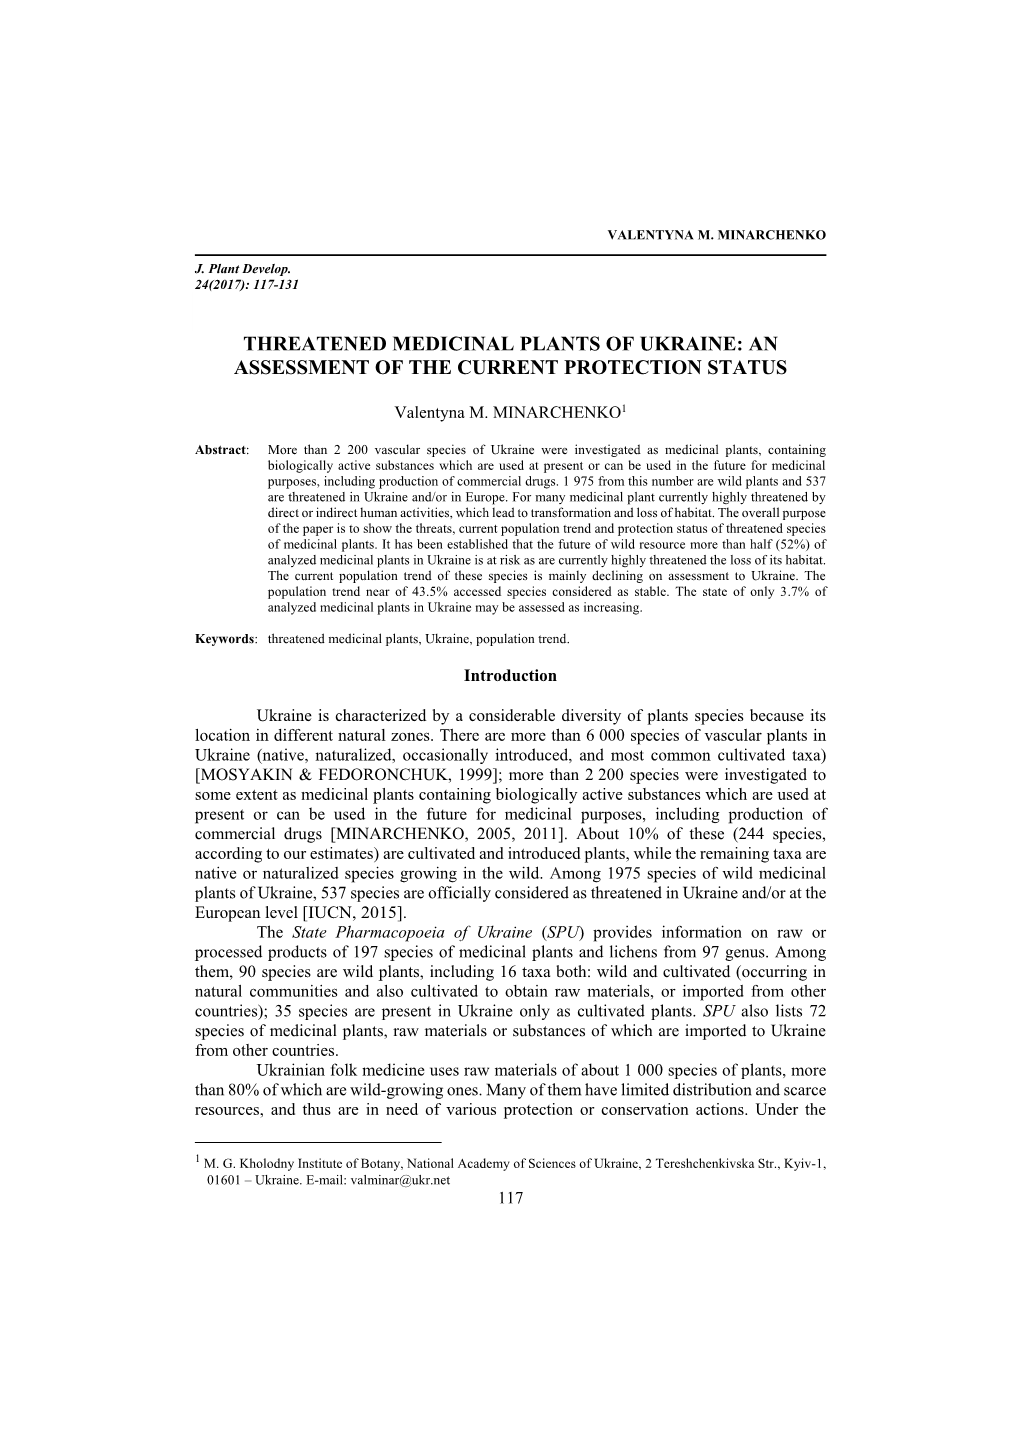 Threatened Medicinal Plants of Ukraine: an Assessment of the Current Protection Status